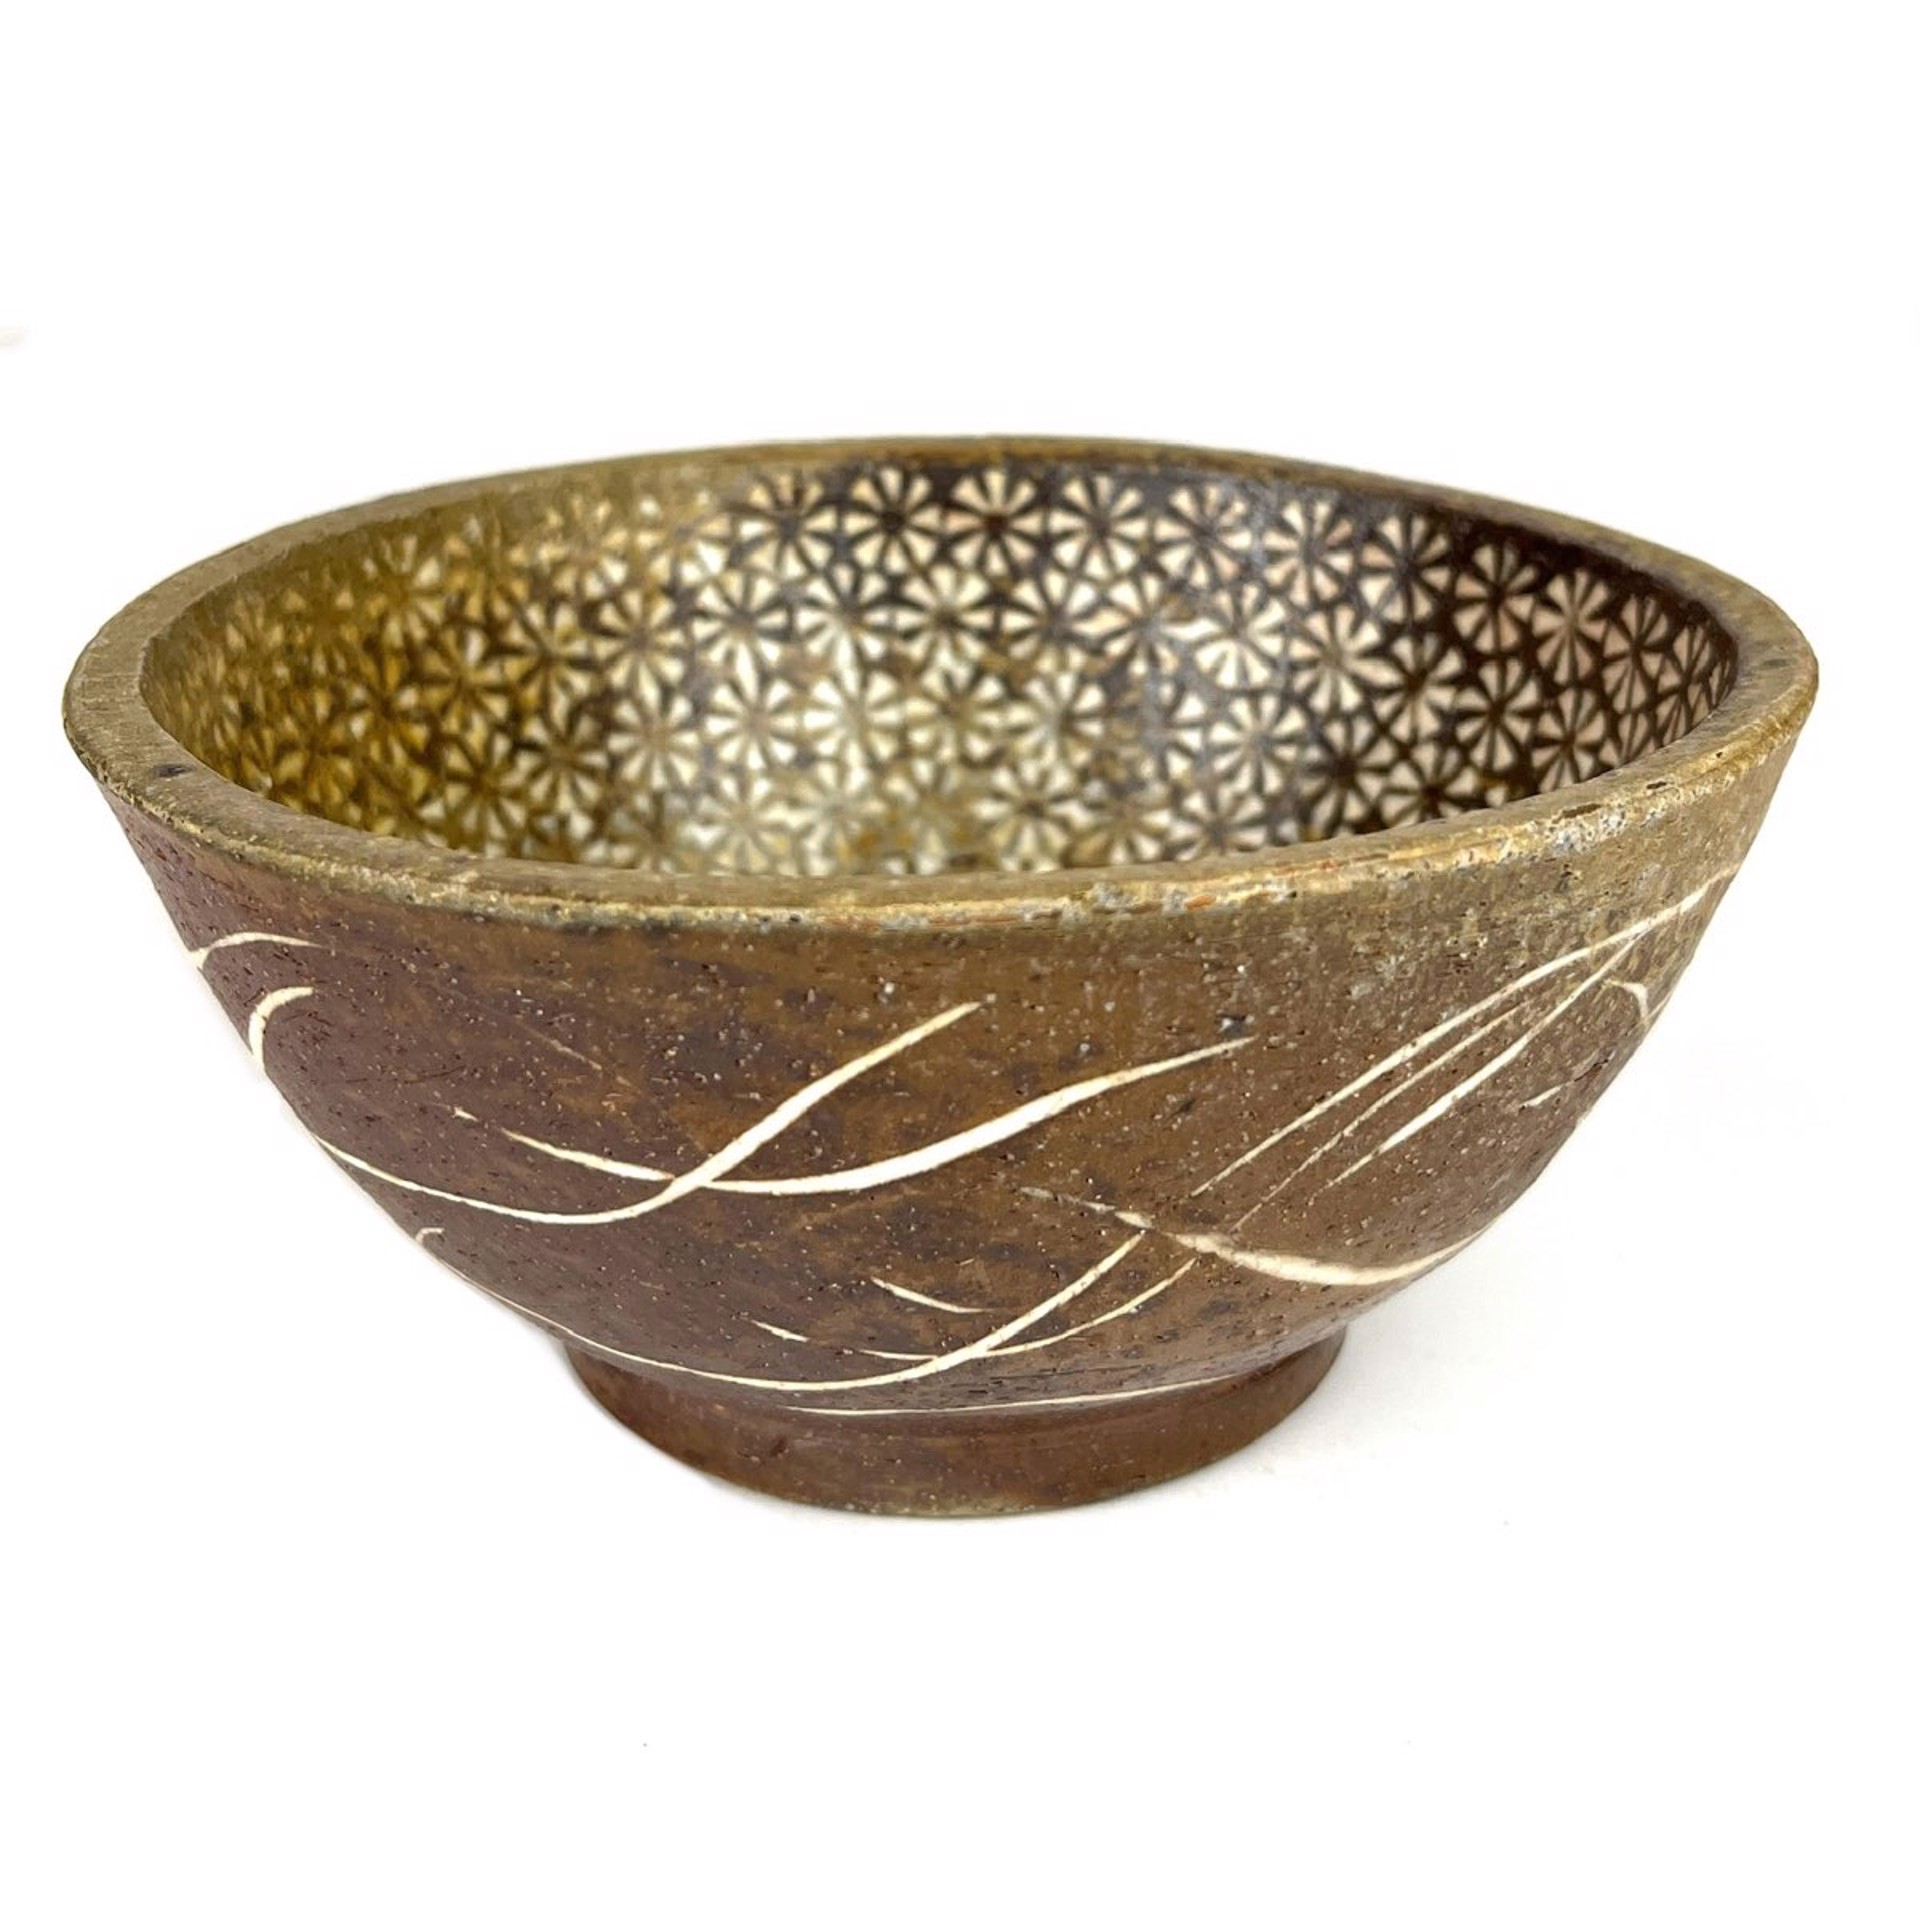 Wood-Fired Bowl by Mitch Yung